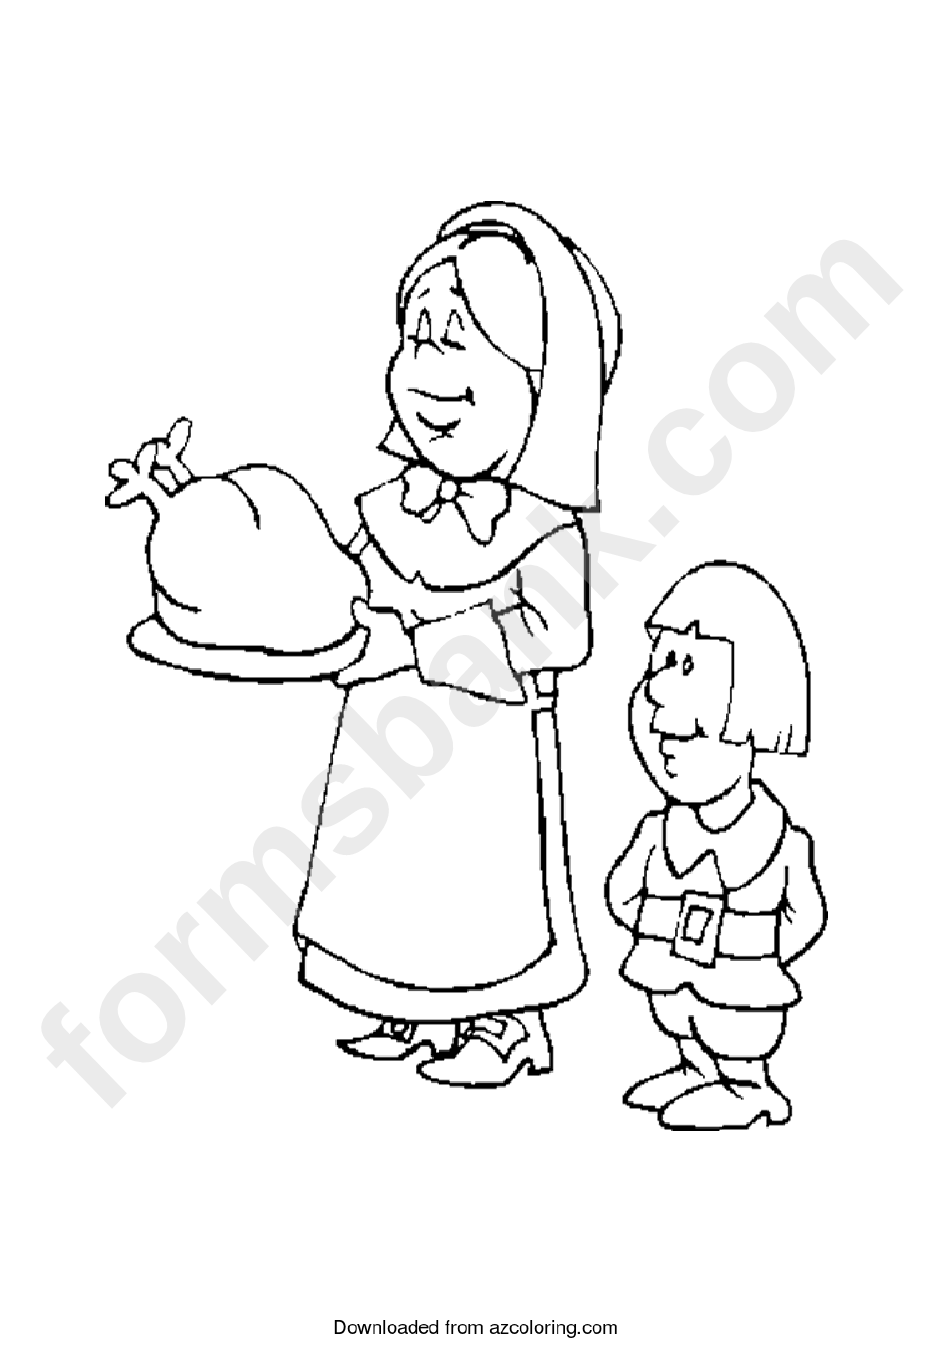 Pilgrim Woman And Boy With Cooked Turkey - Coloring Sheet